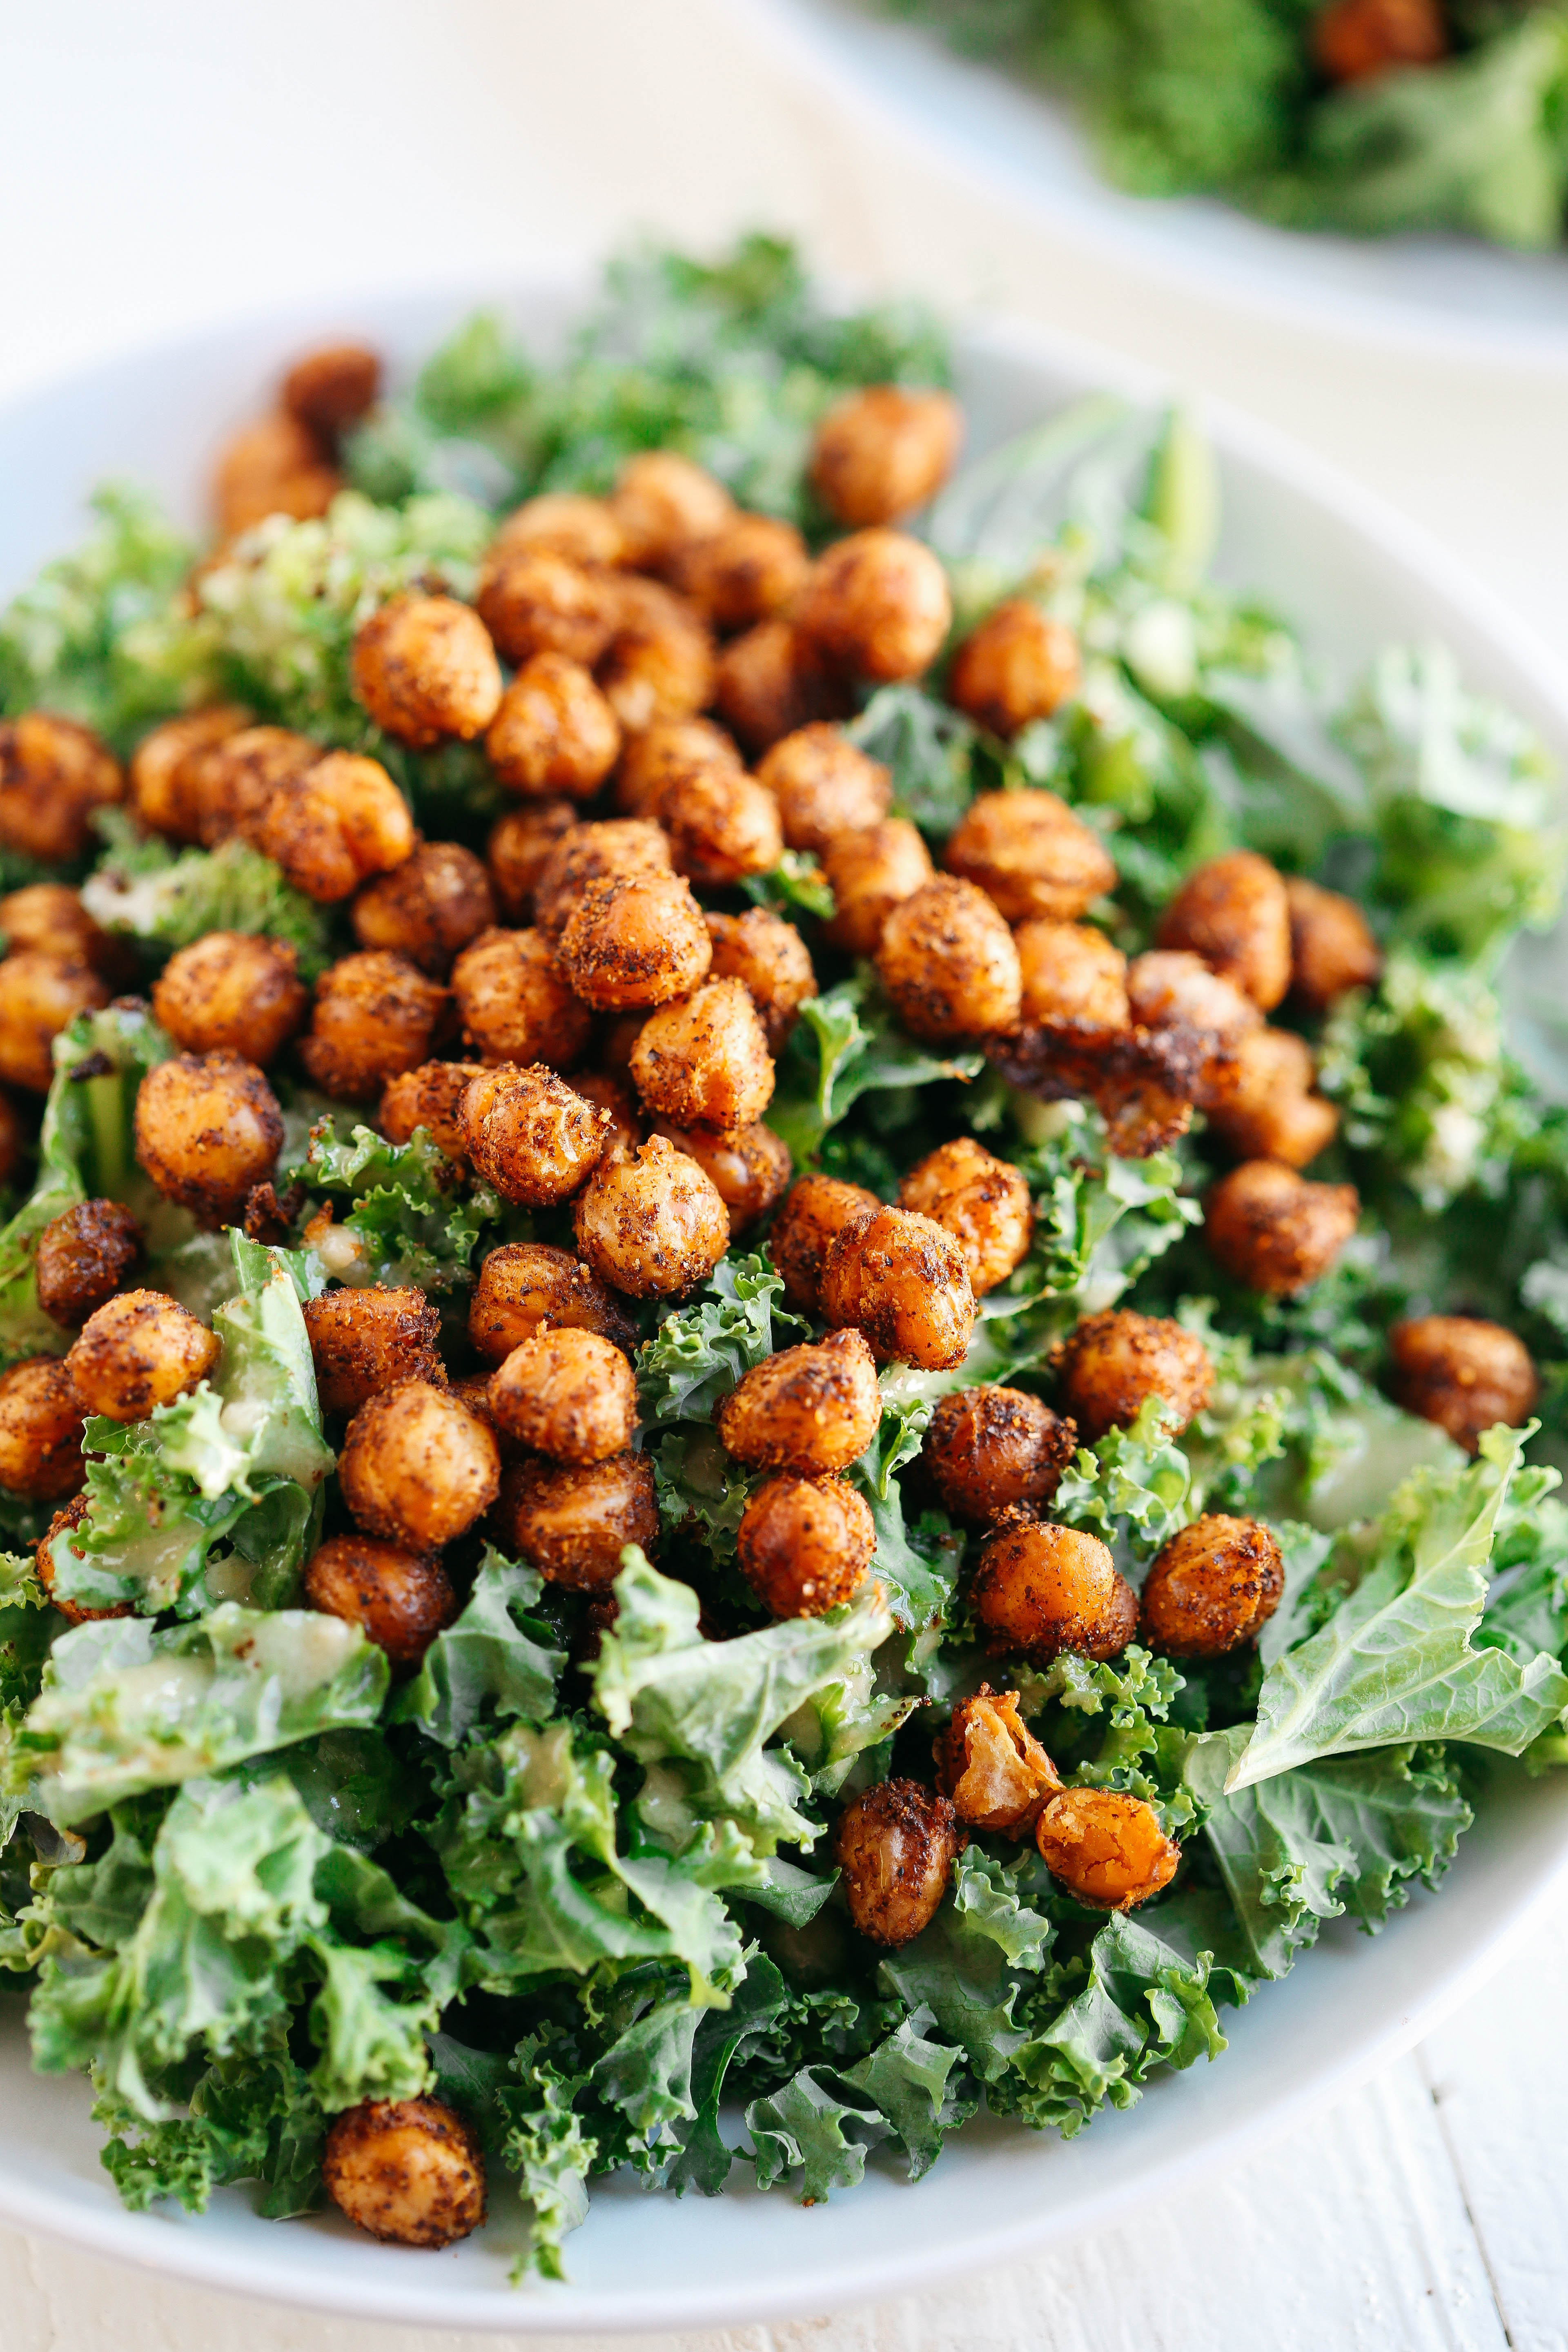 This Roasted Chickpea and Kale Salad with delicious creamy tahini dressing is hearty, healthy and full of so much flavor!